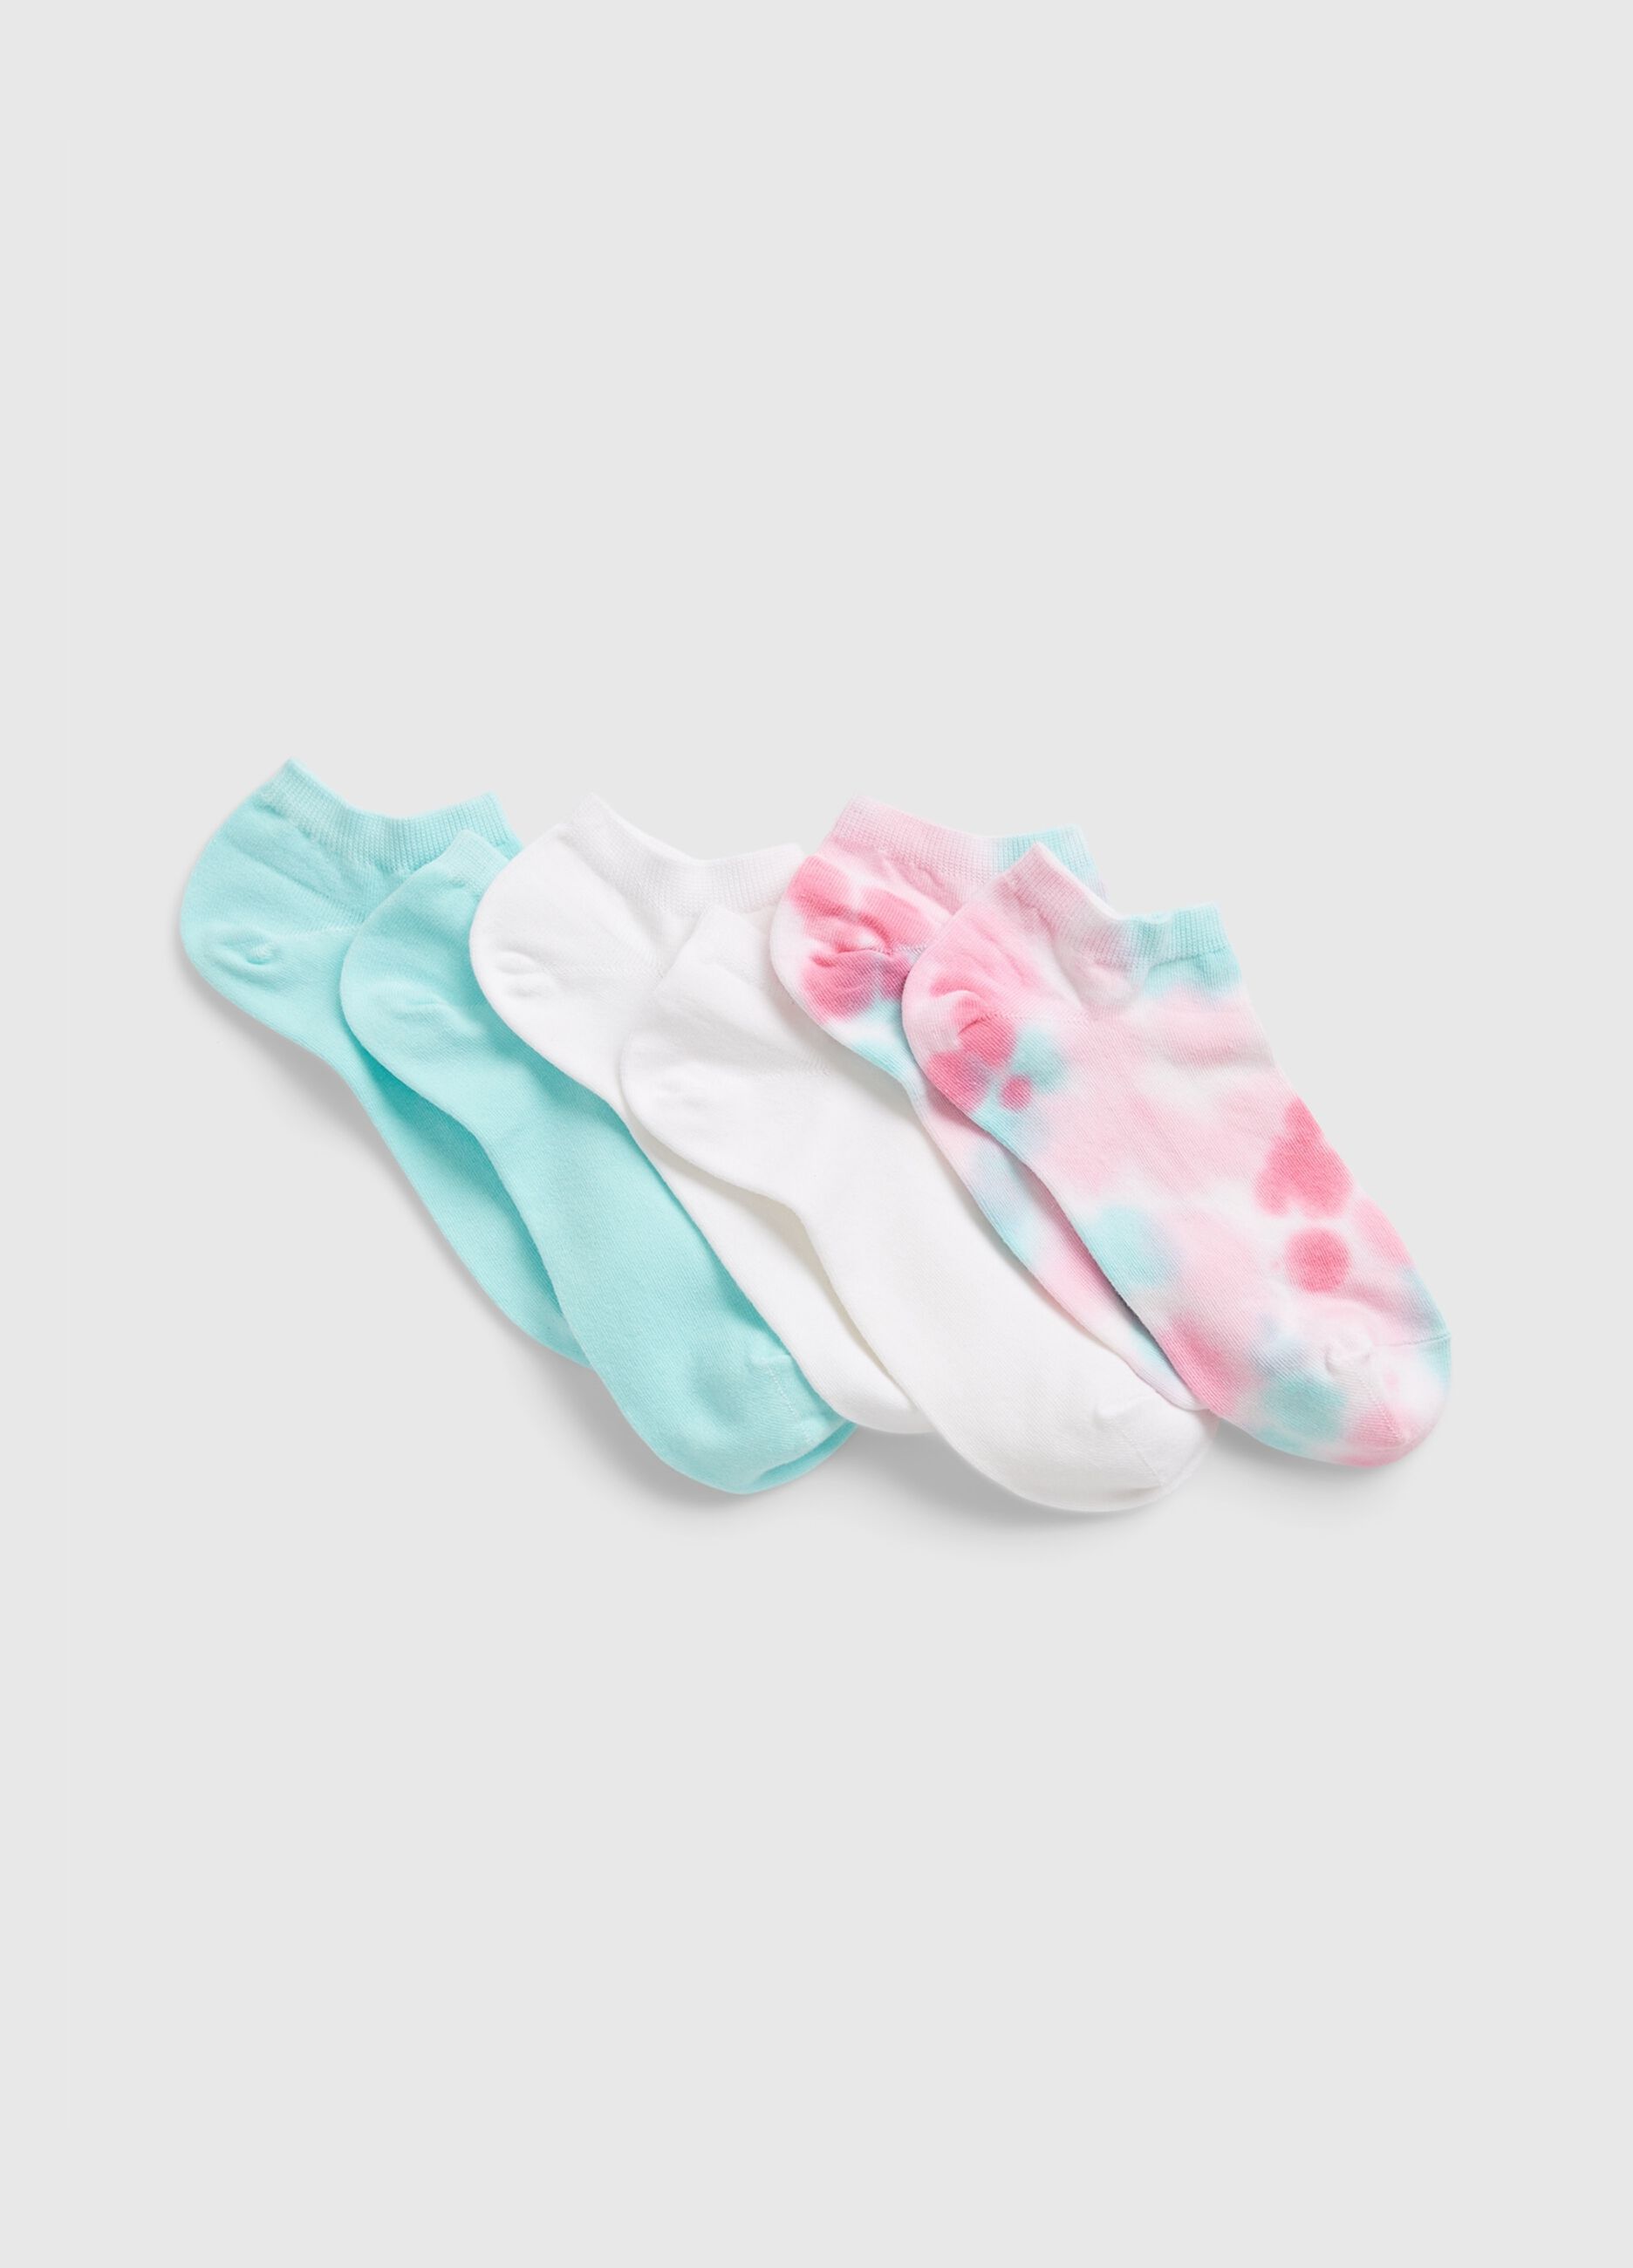 Three-pair pack shoe liners with tie dye pattern